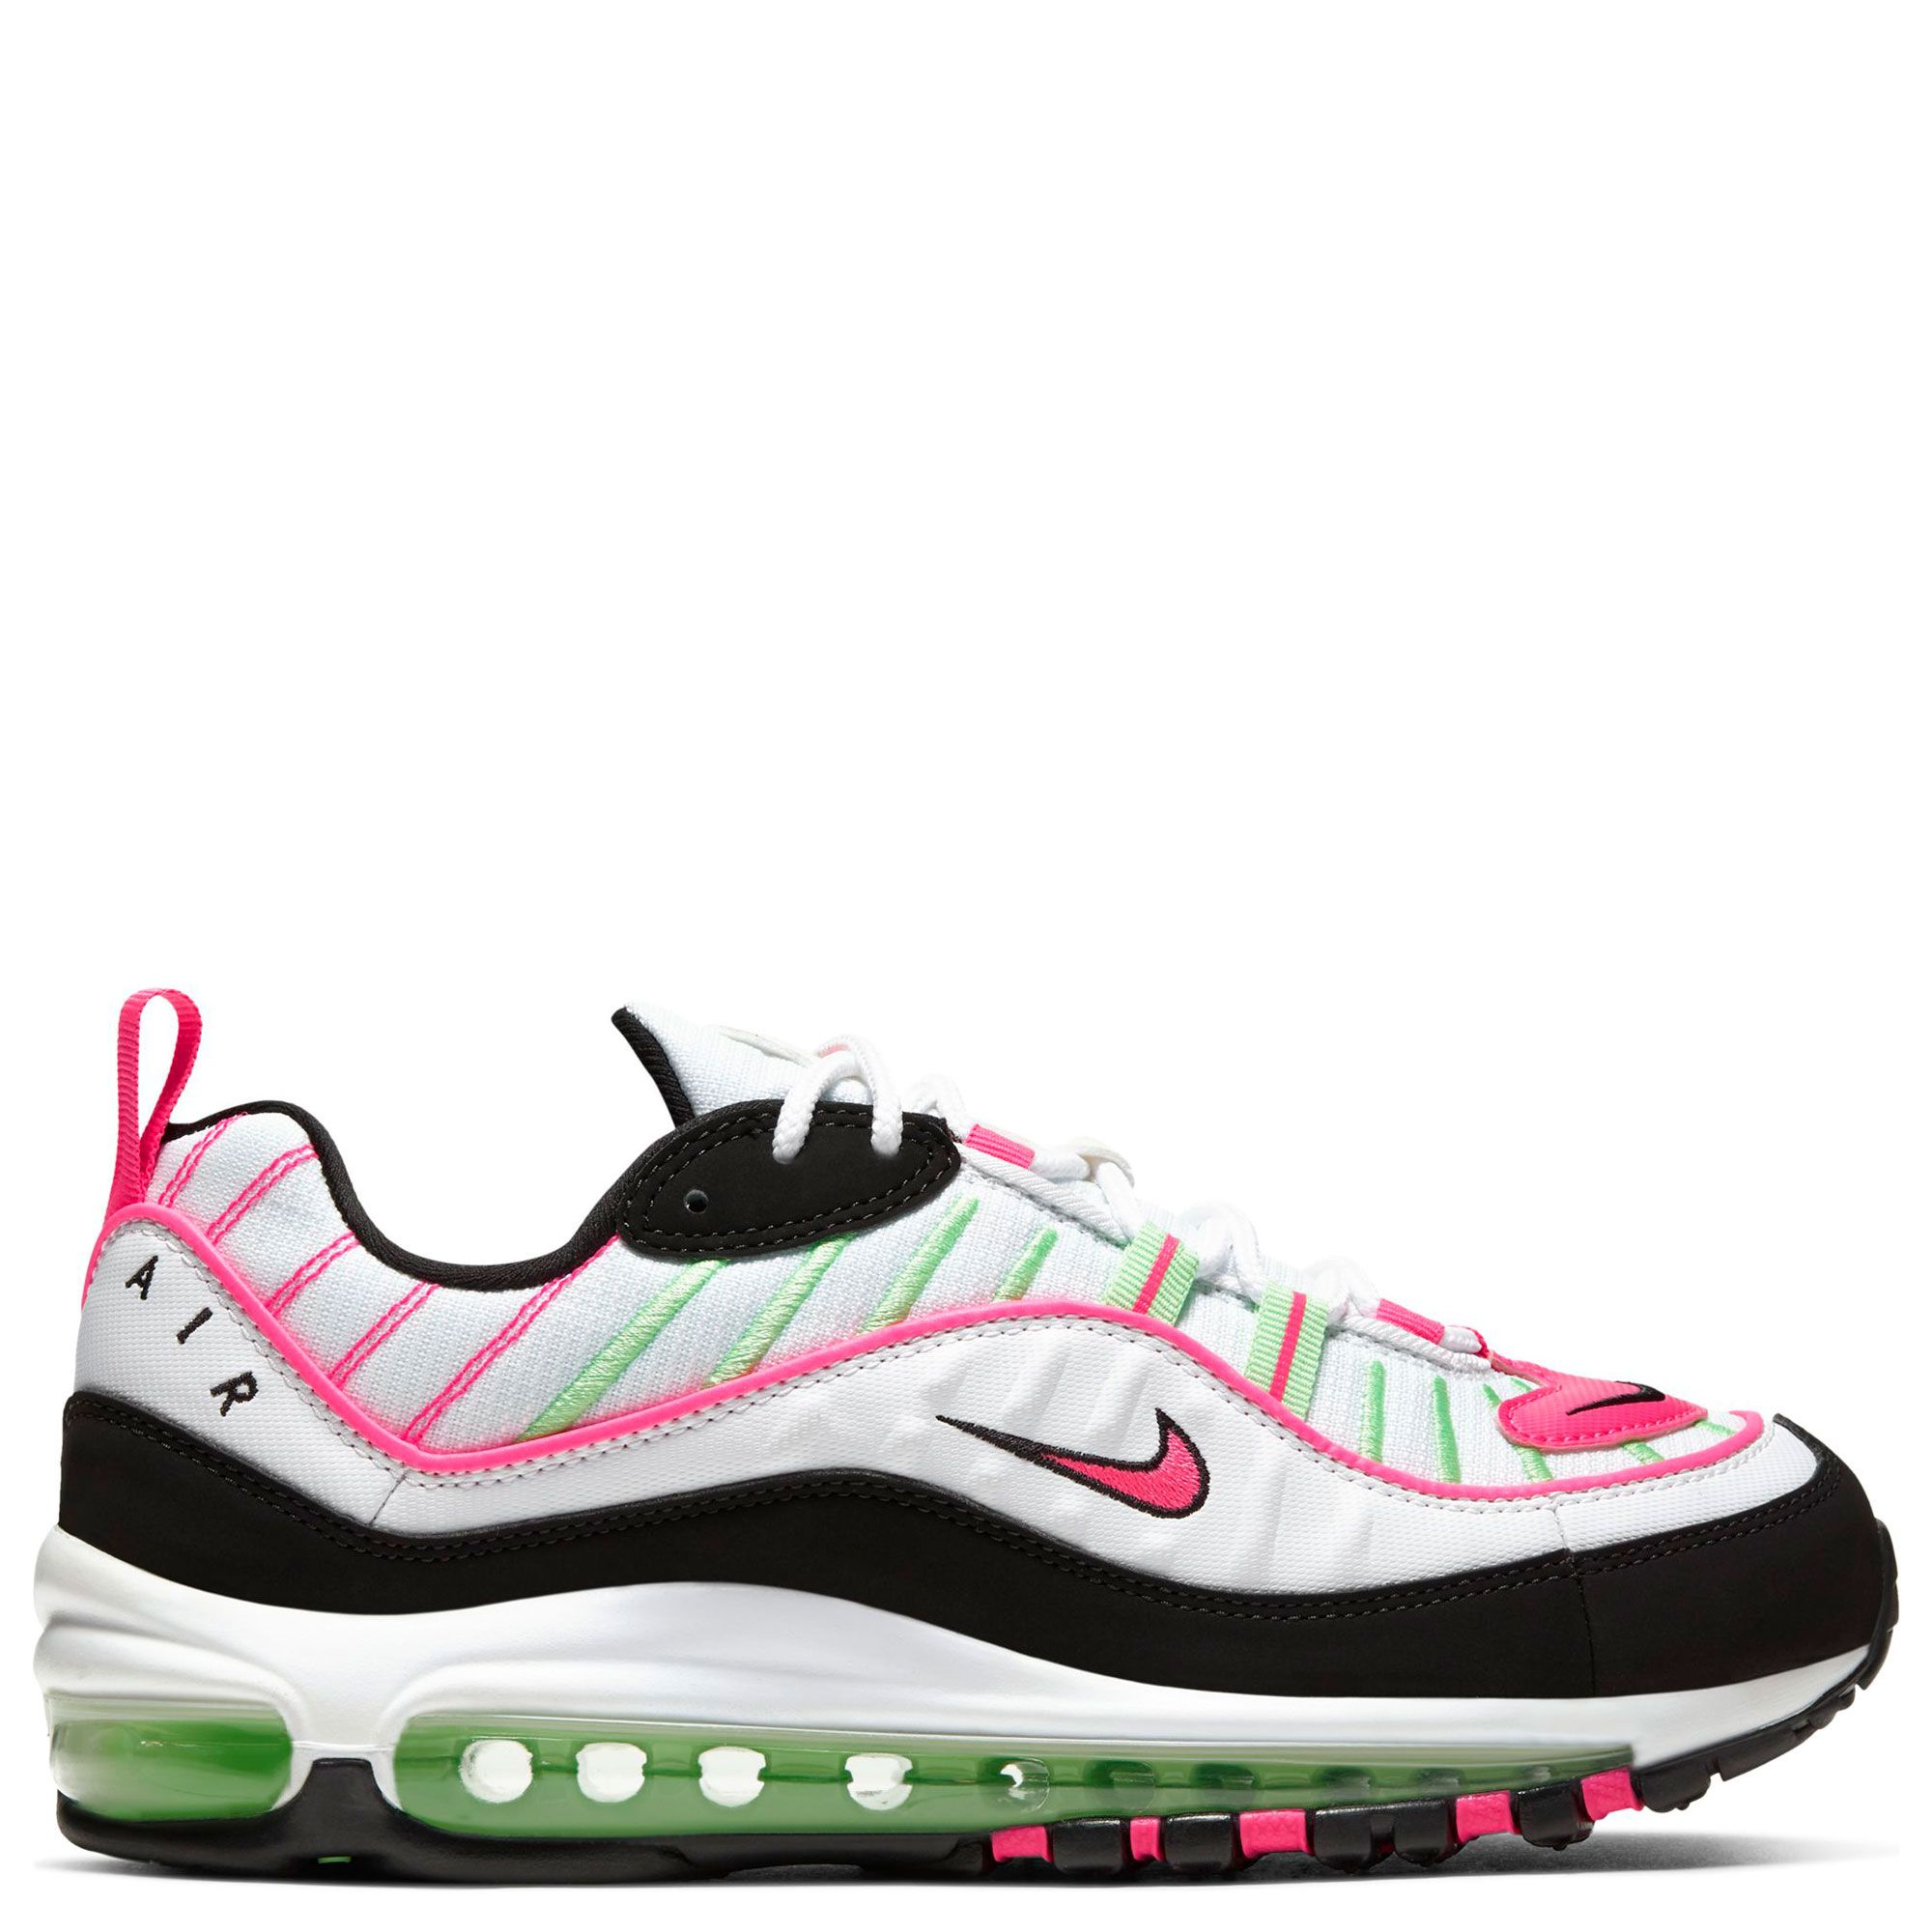 pink and red air max 98